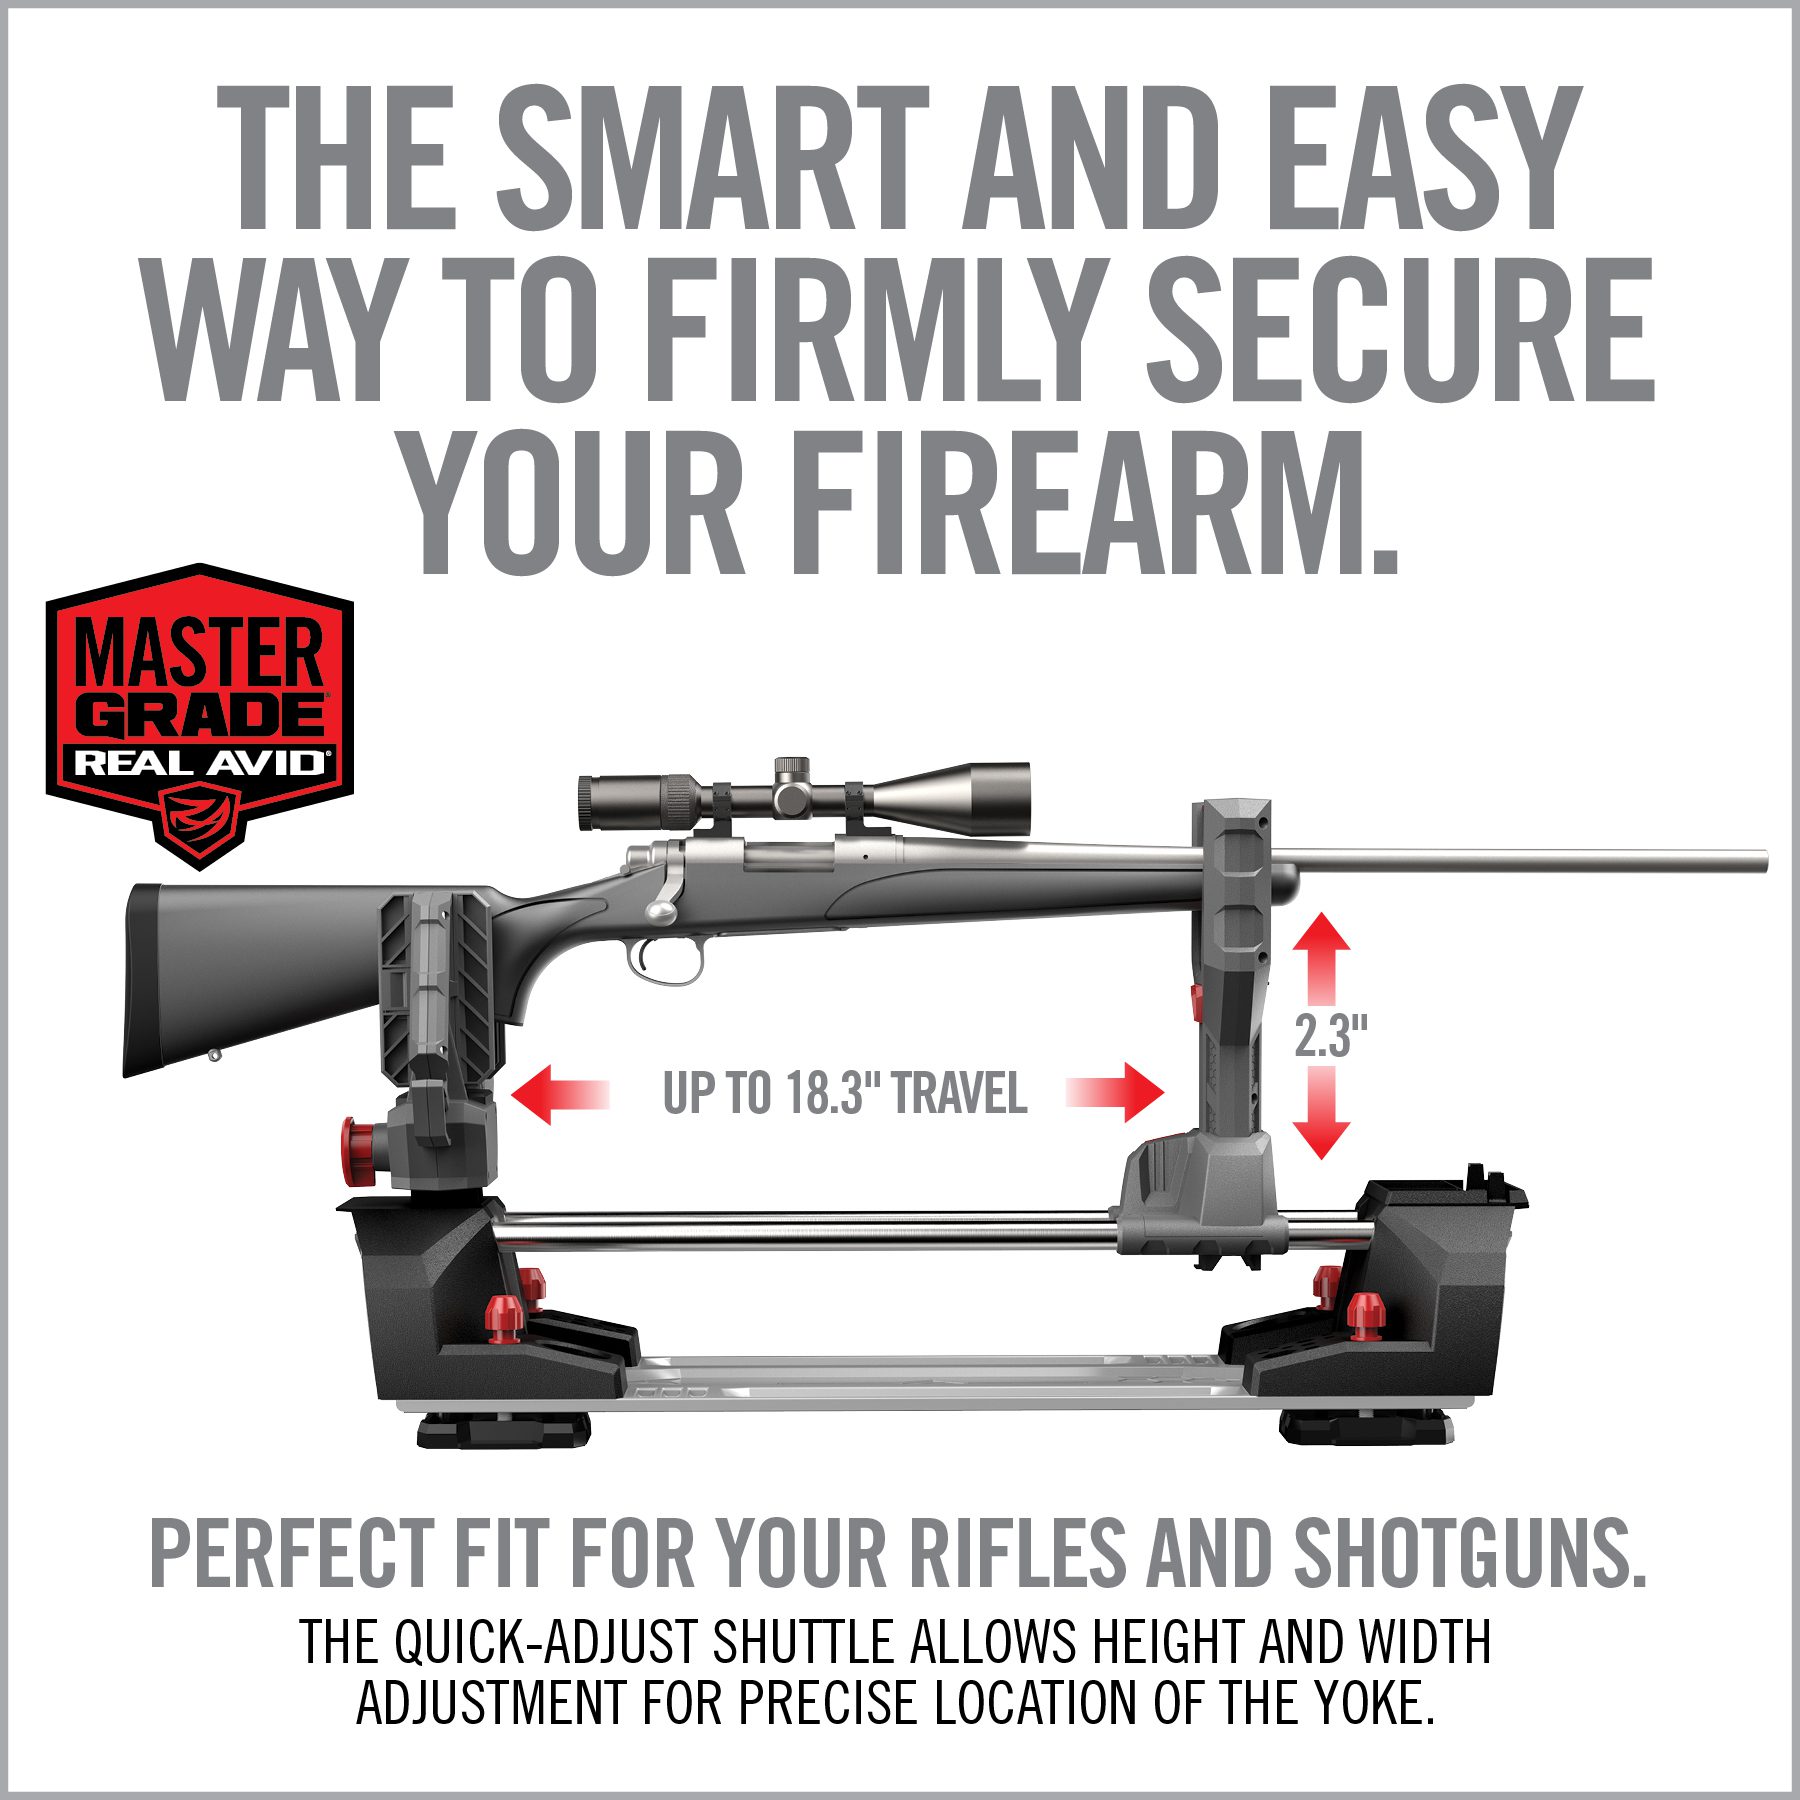 a poster showing how to use a rifle